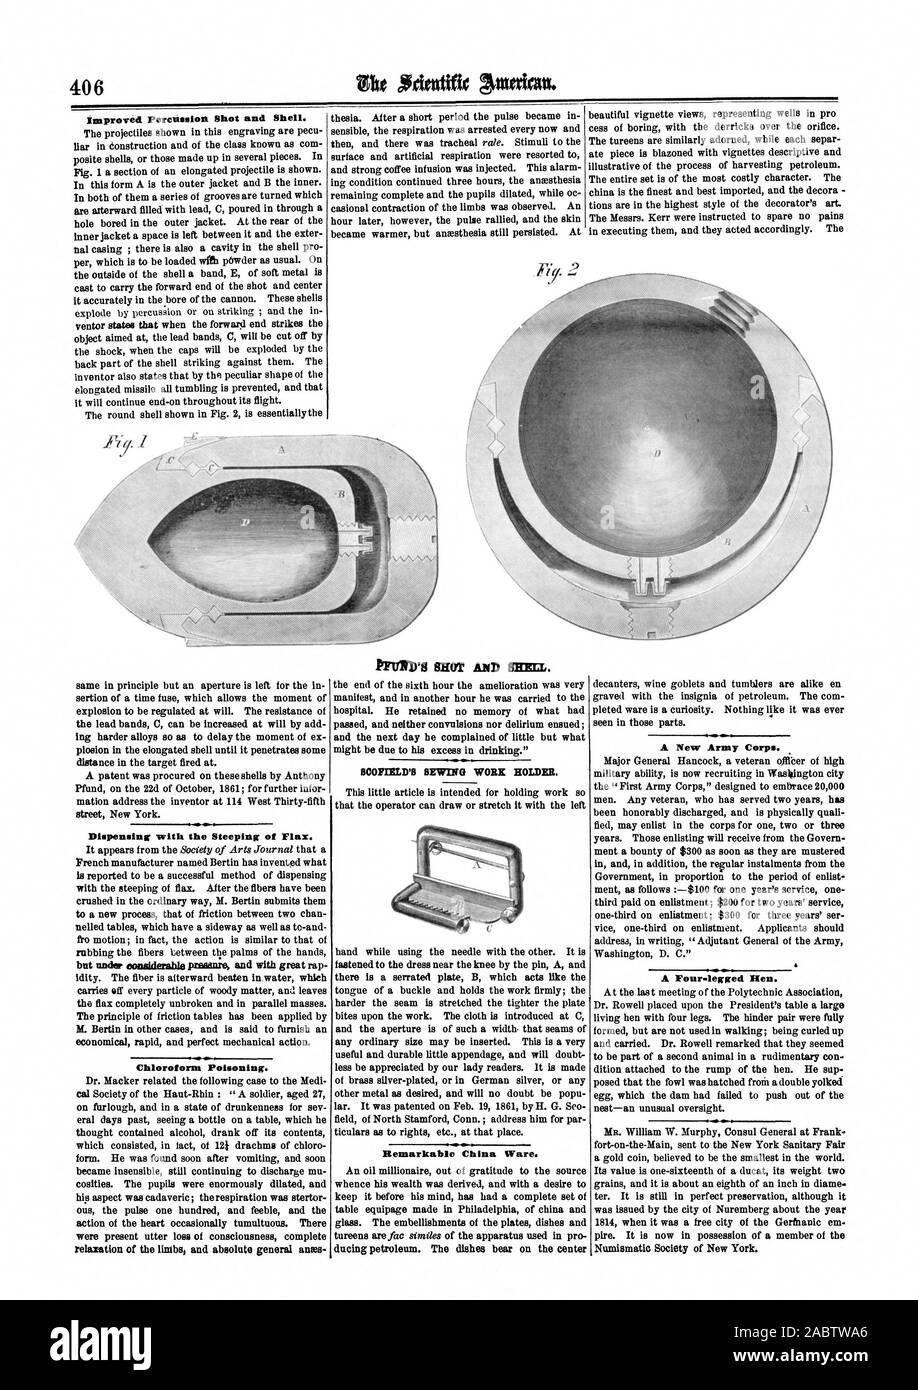 406 Improved Percussion Shot and Shell. Dispensing with the Steeping of Flax. Chloroform Poisoning. SCOFIELD'S SEWING WORK HOLDER. Remarkable China Ware. A New Army Corp, scientific american, 64-12-24 Stock Photo